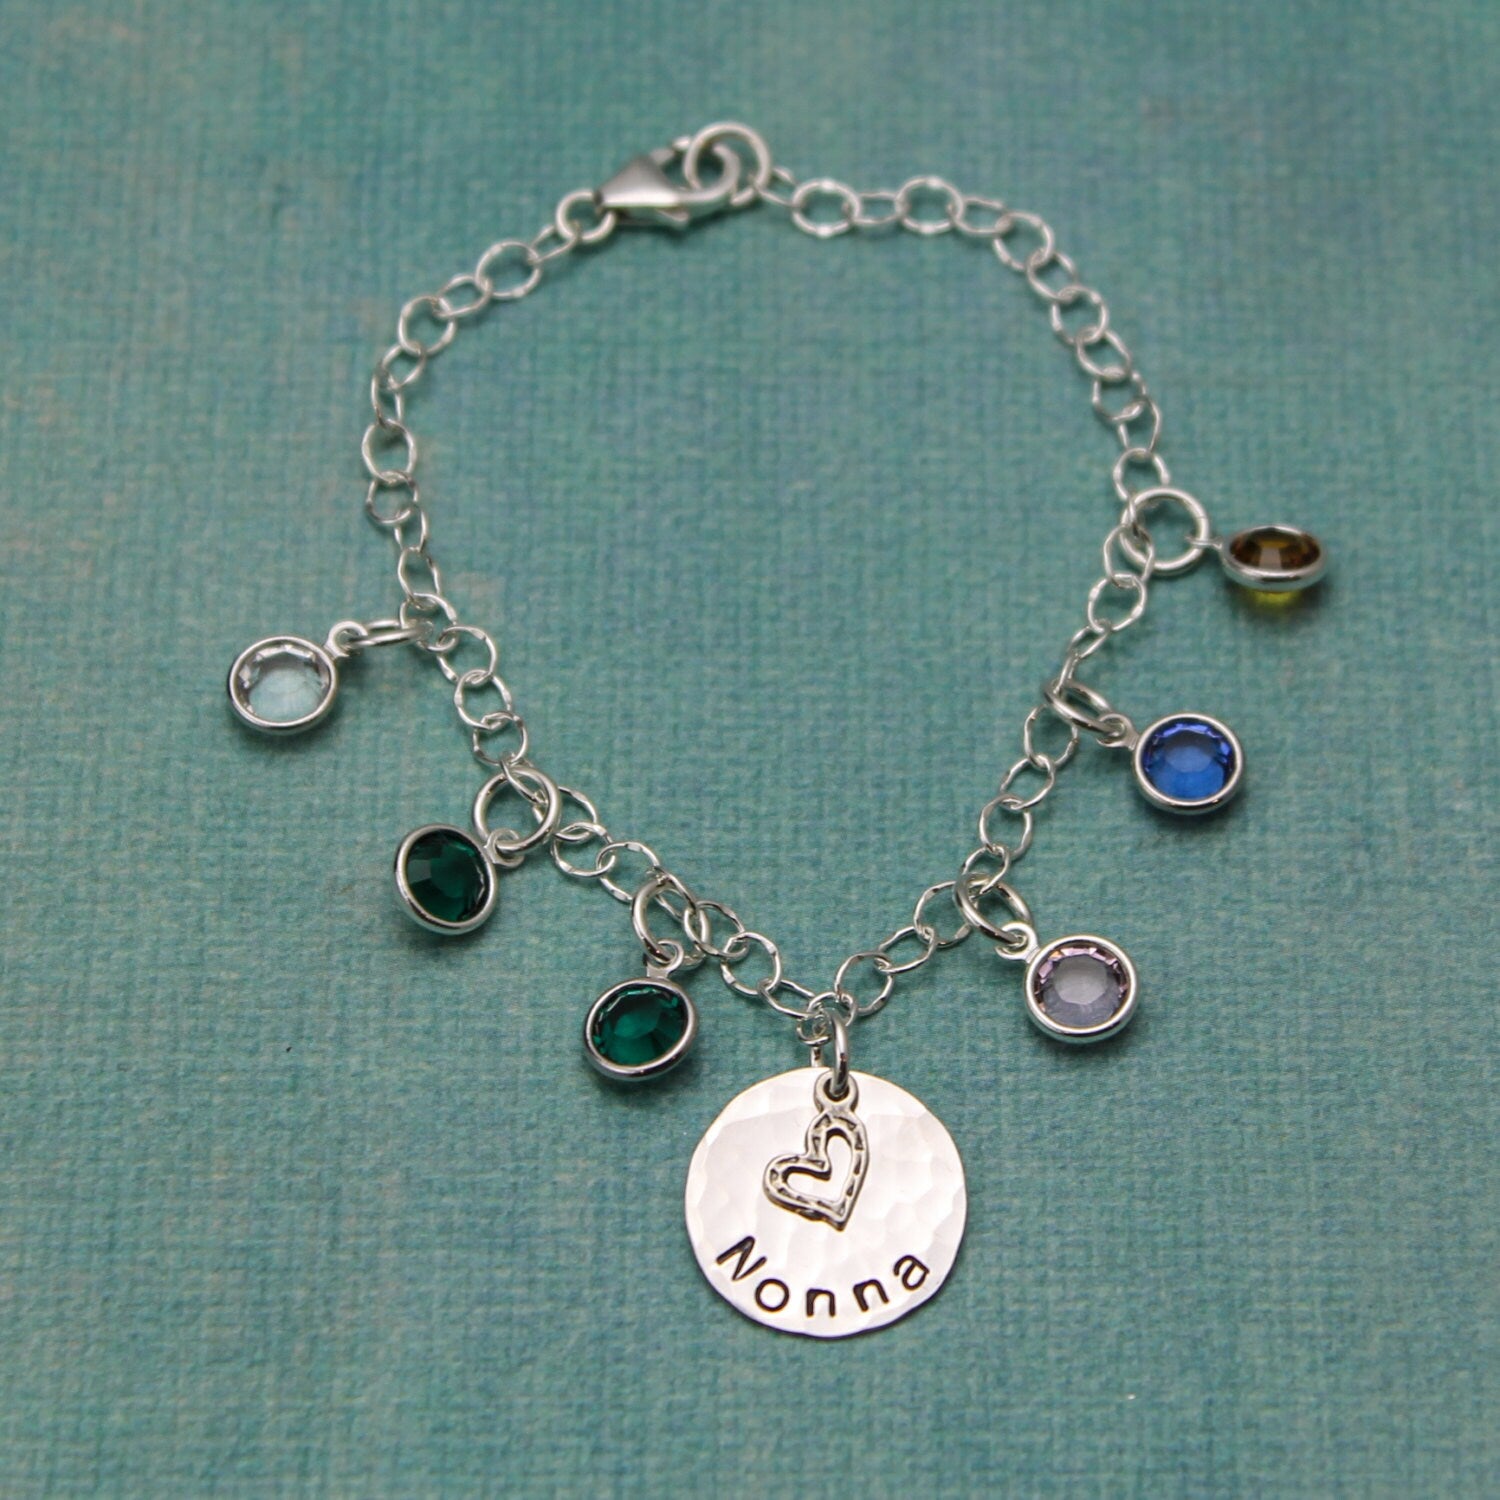 Grandmother or Mother Personalized Bracelet with Birthstones - Hand Stamped in Sterling Silver